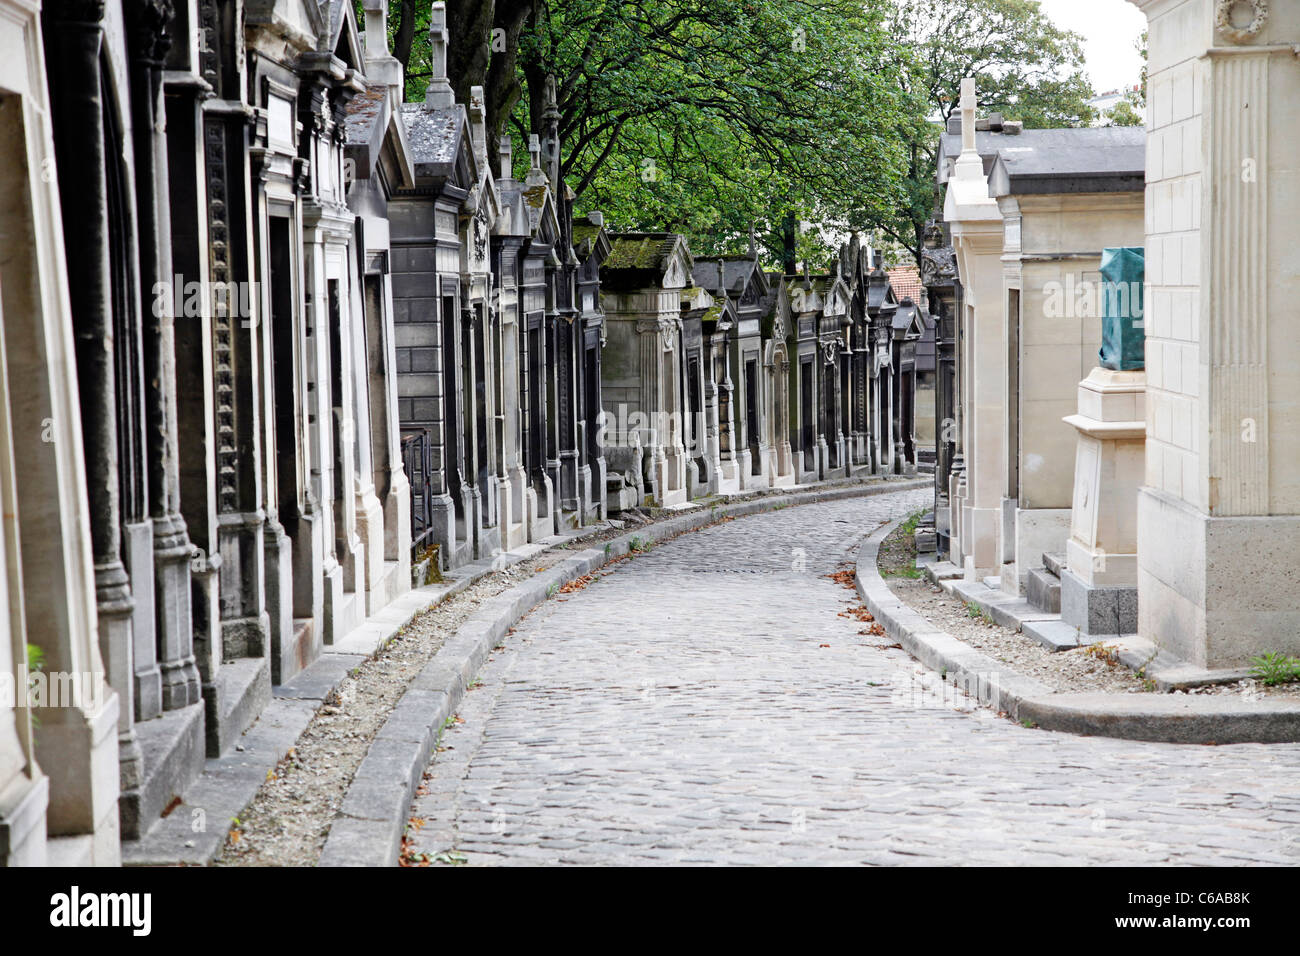 Mausoleums and graves in the graveyard at the Pere Lachaise cemetery in Paris, France Stock Photo